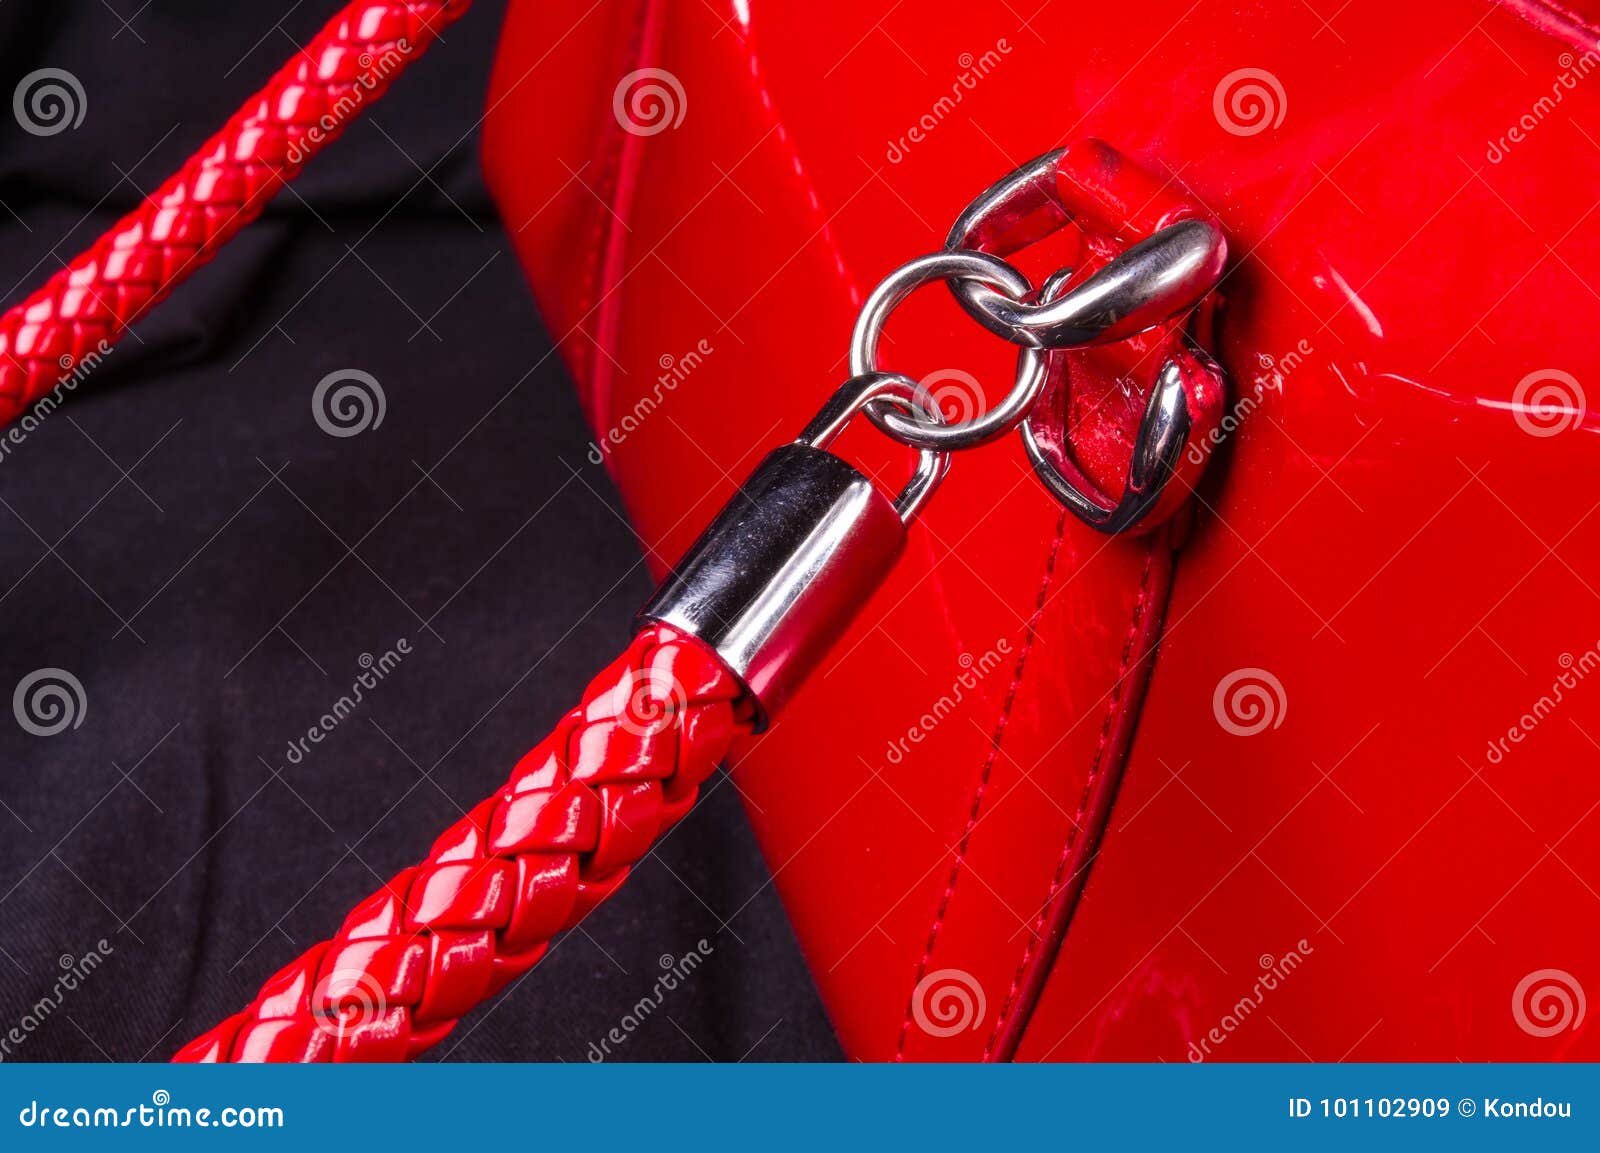 Fittings on the Leather Hand Bag Stock Image - Image of pockets ...